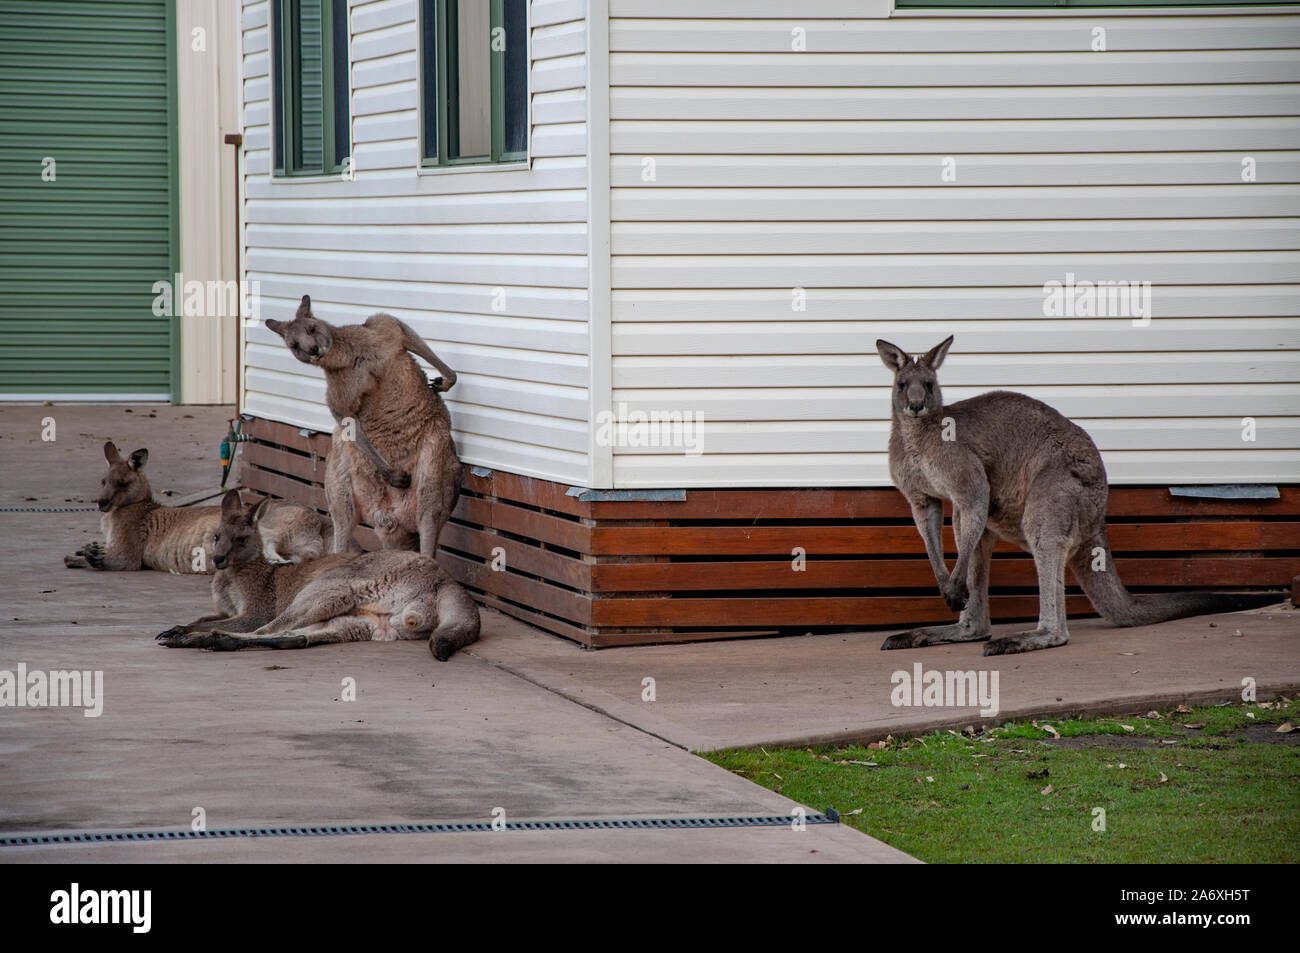 Kangaroos lounging in driveway and against the wall of a house, Kiola Beach, New South Wales, Australia. Stock Photo